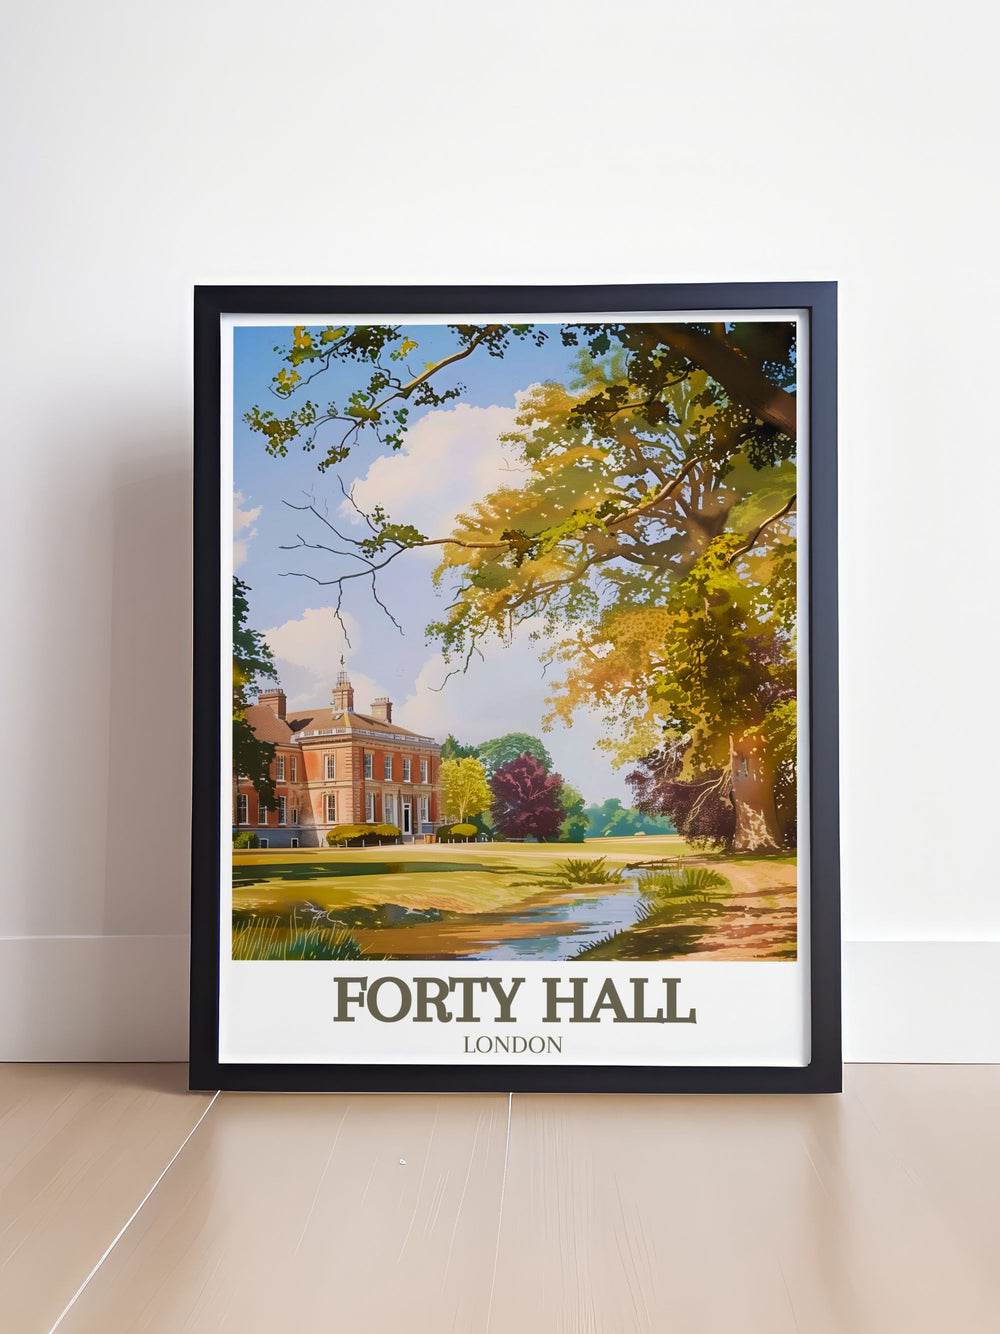 Forty Hall Museums historical exhibits and preserved interiors are captured, offering insights into Londons fascinating past.